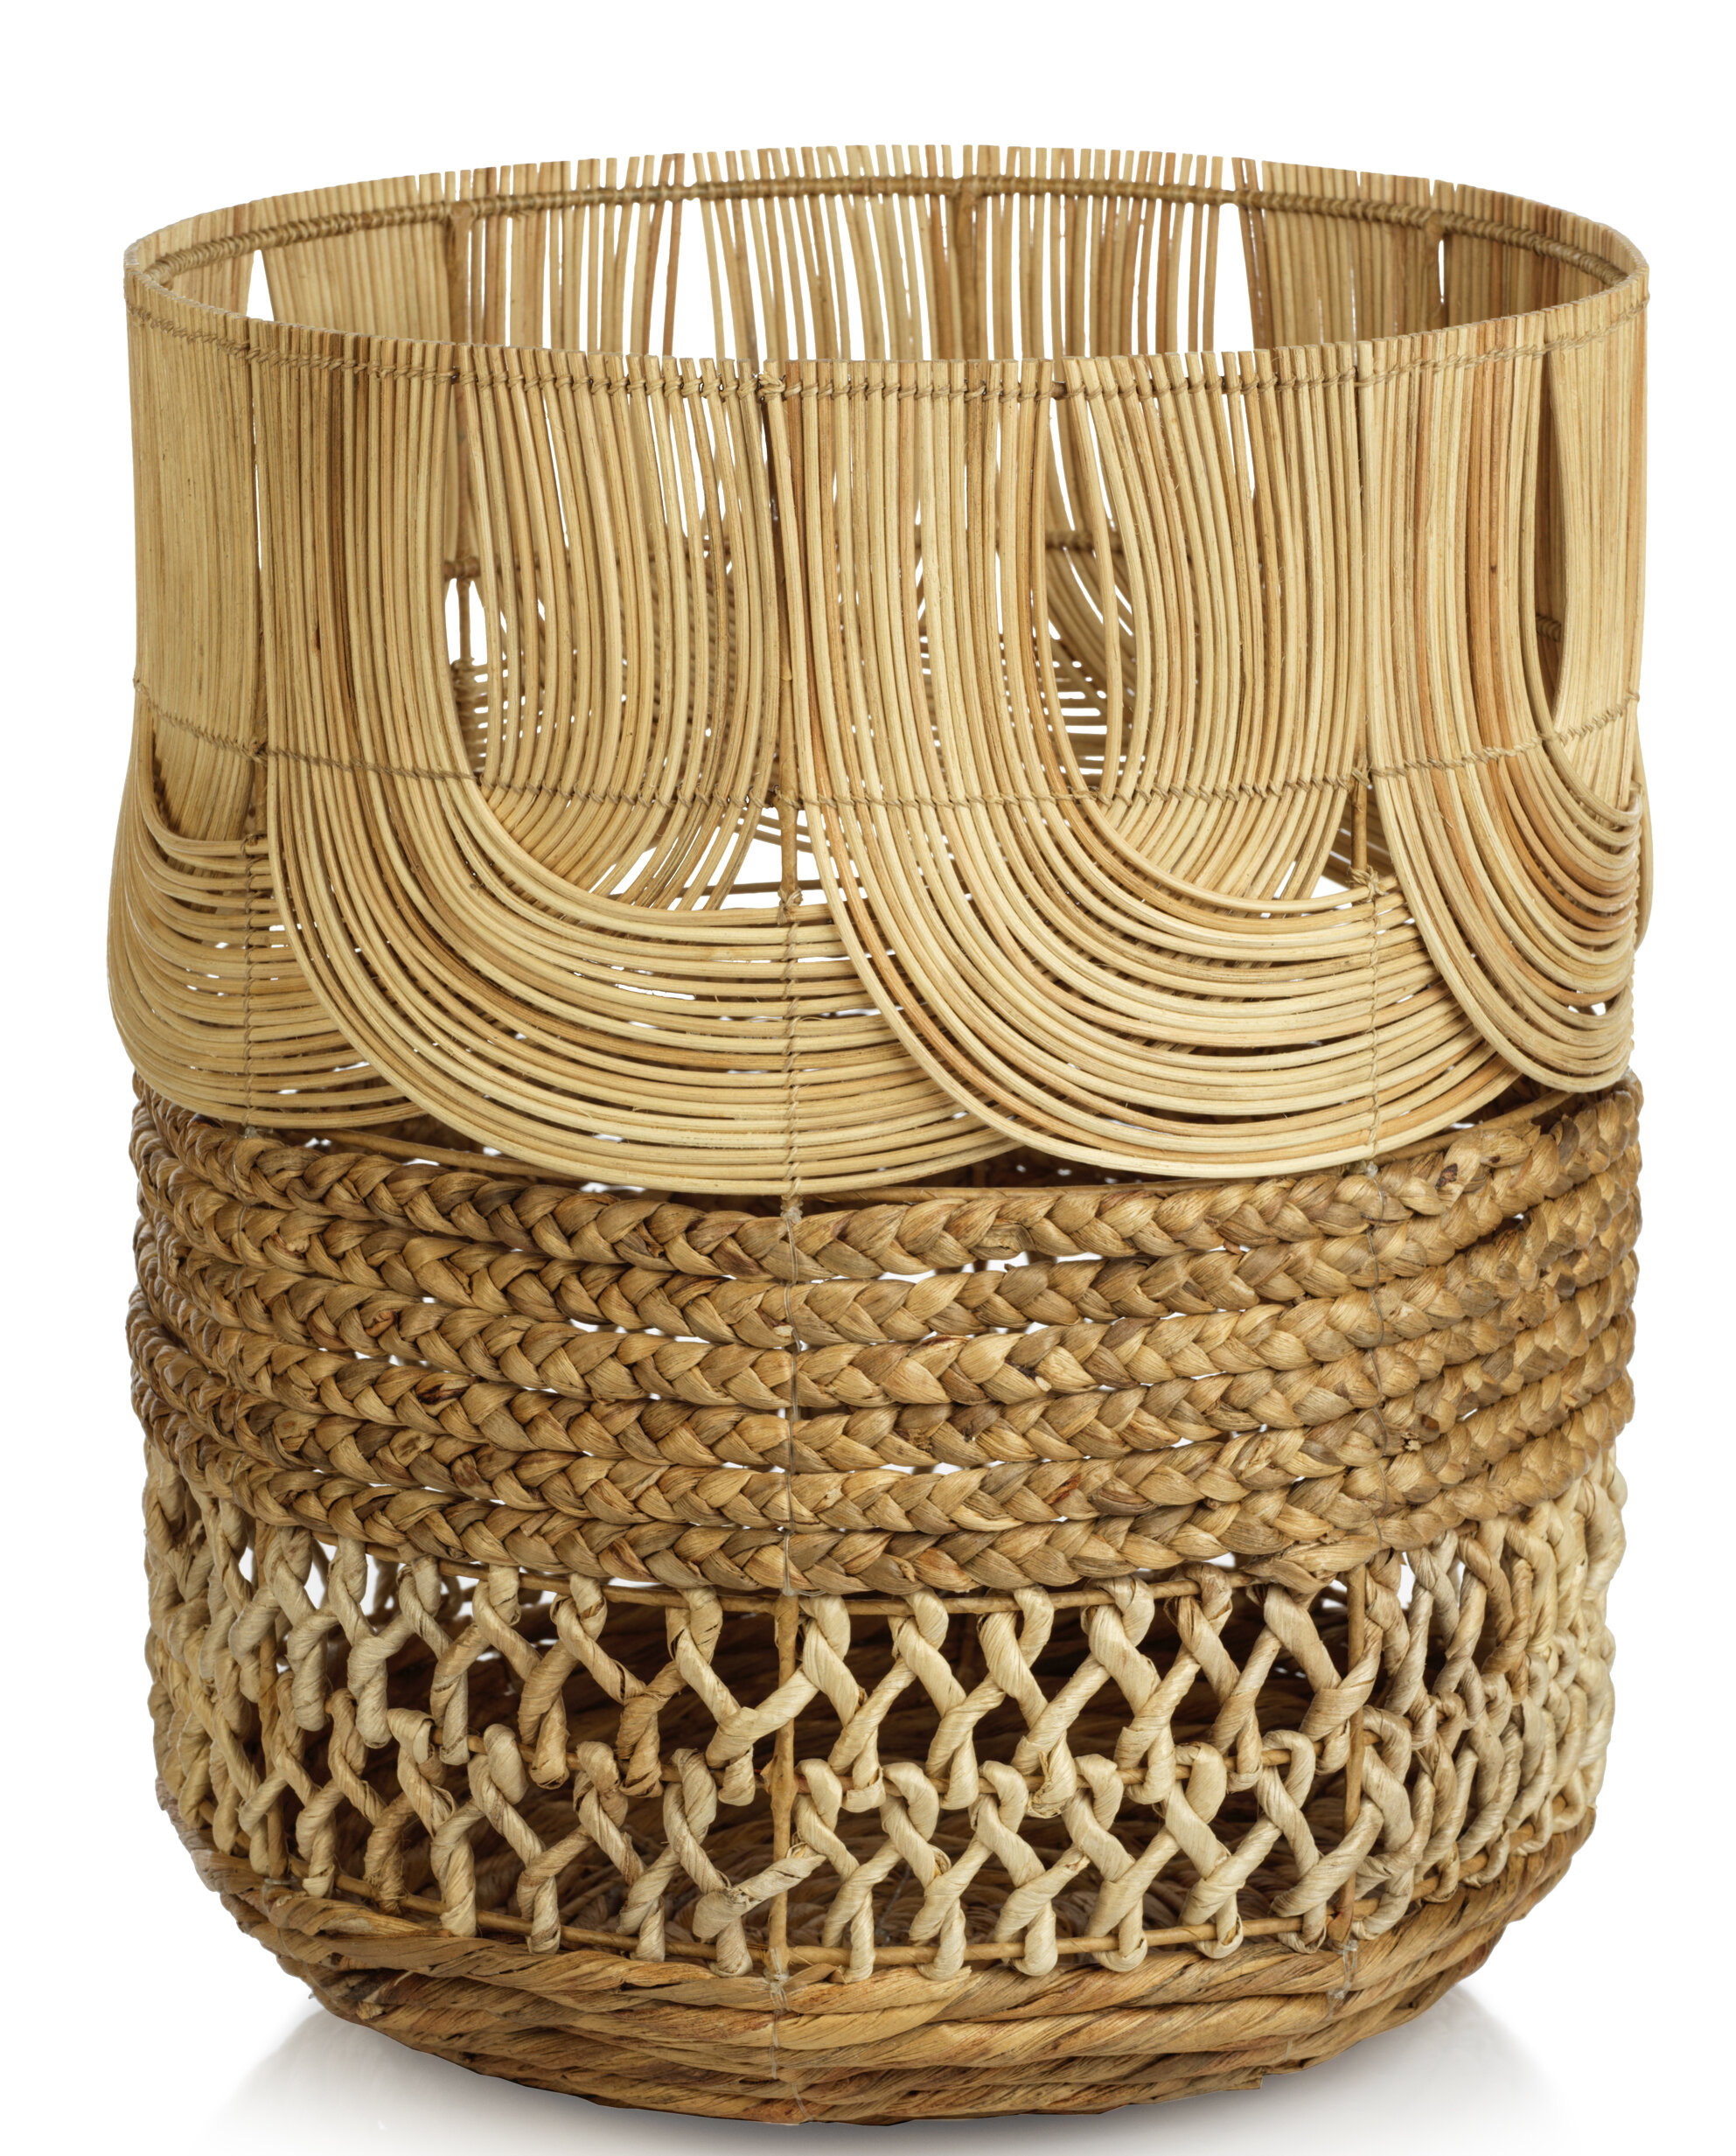 Woven Abaca Storage Basket with Lid, Small, Natural Sold by at Home